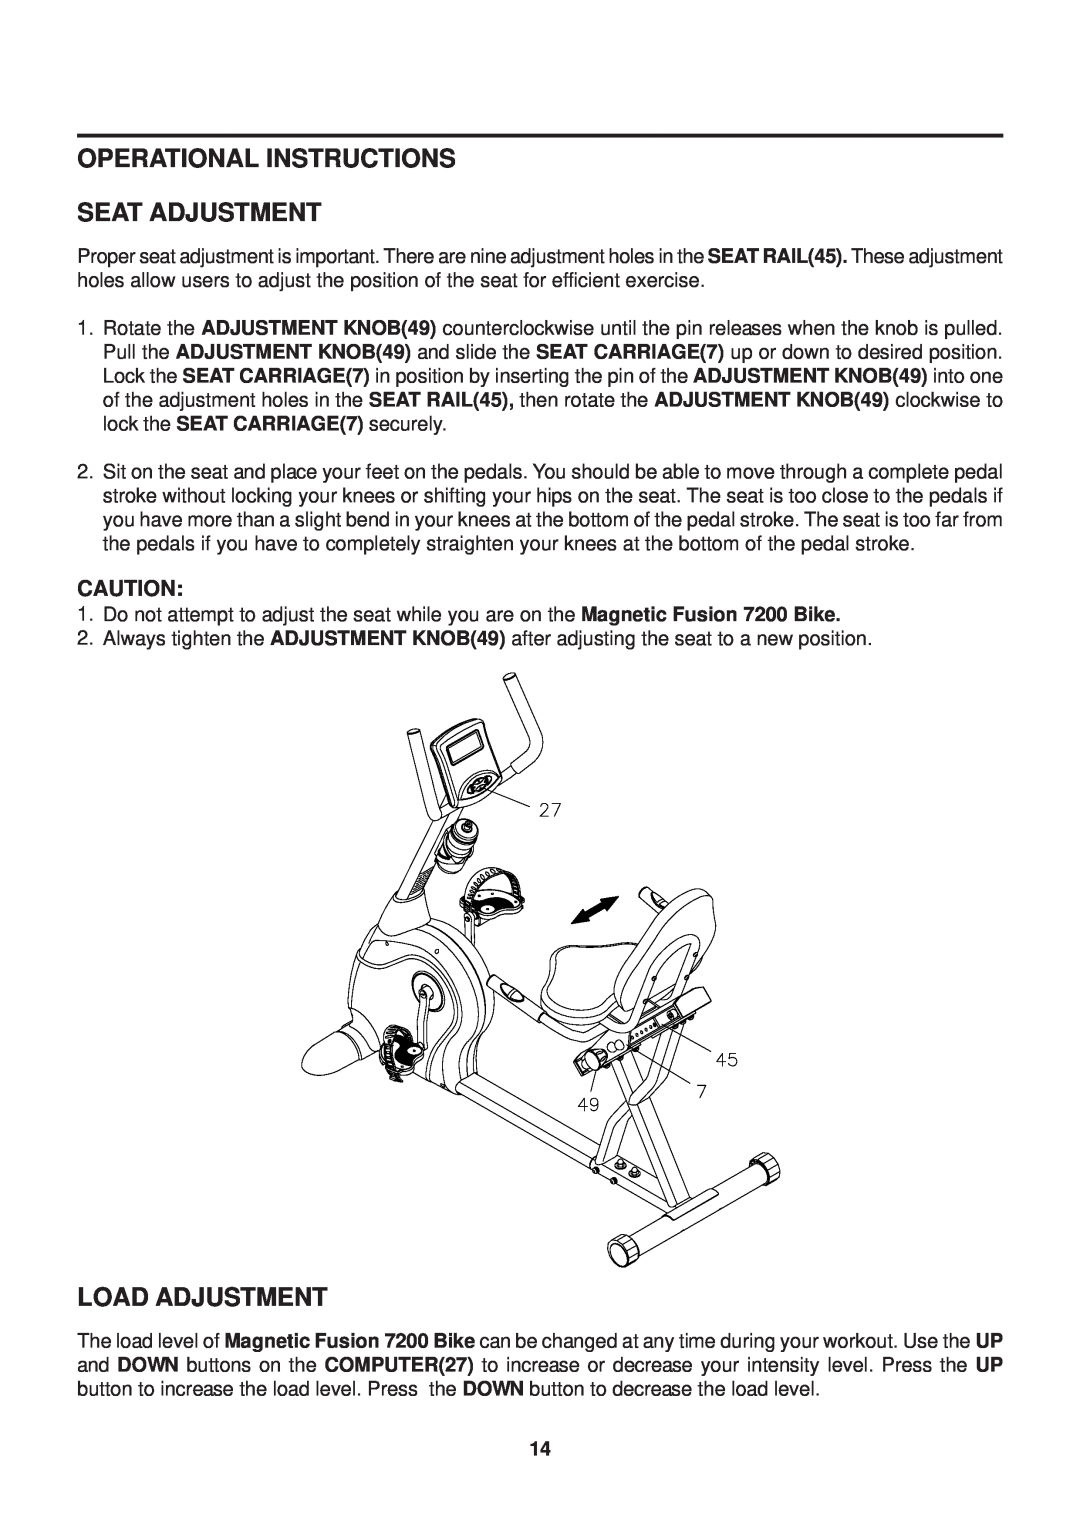 Stamina Products 15-7200 owner manual Operational Instructions Seat Adjustment, Load Adjustment 